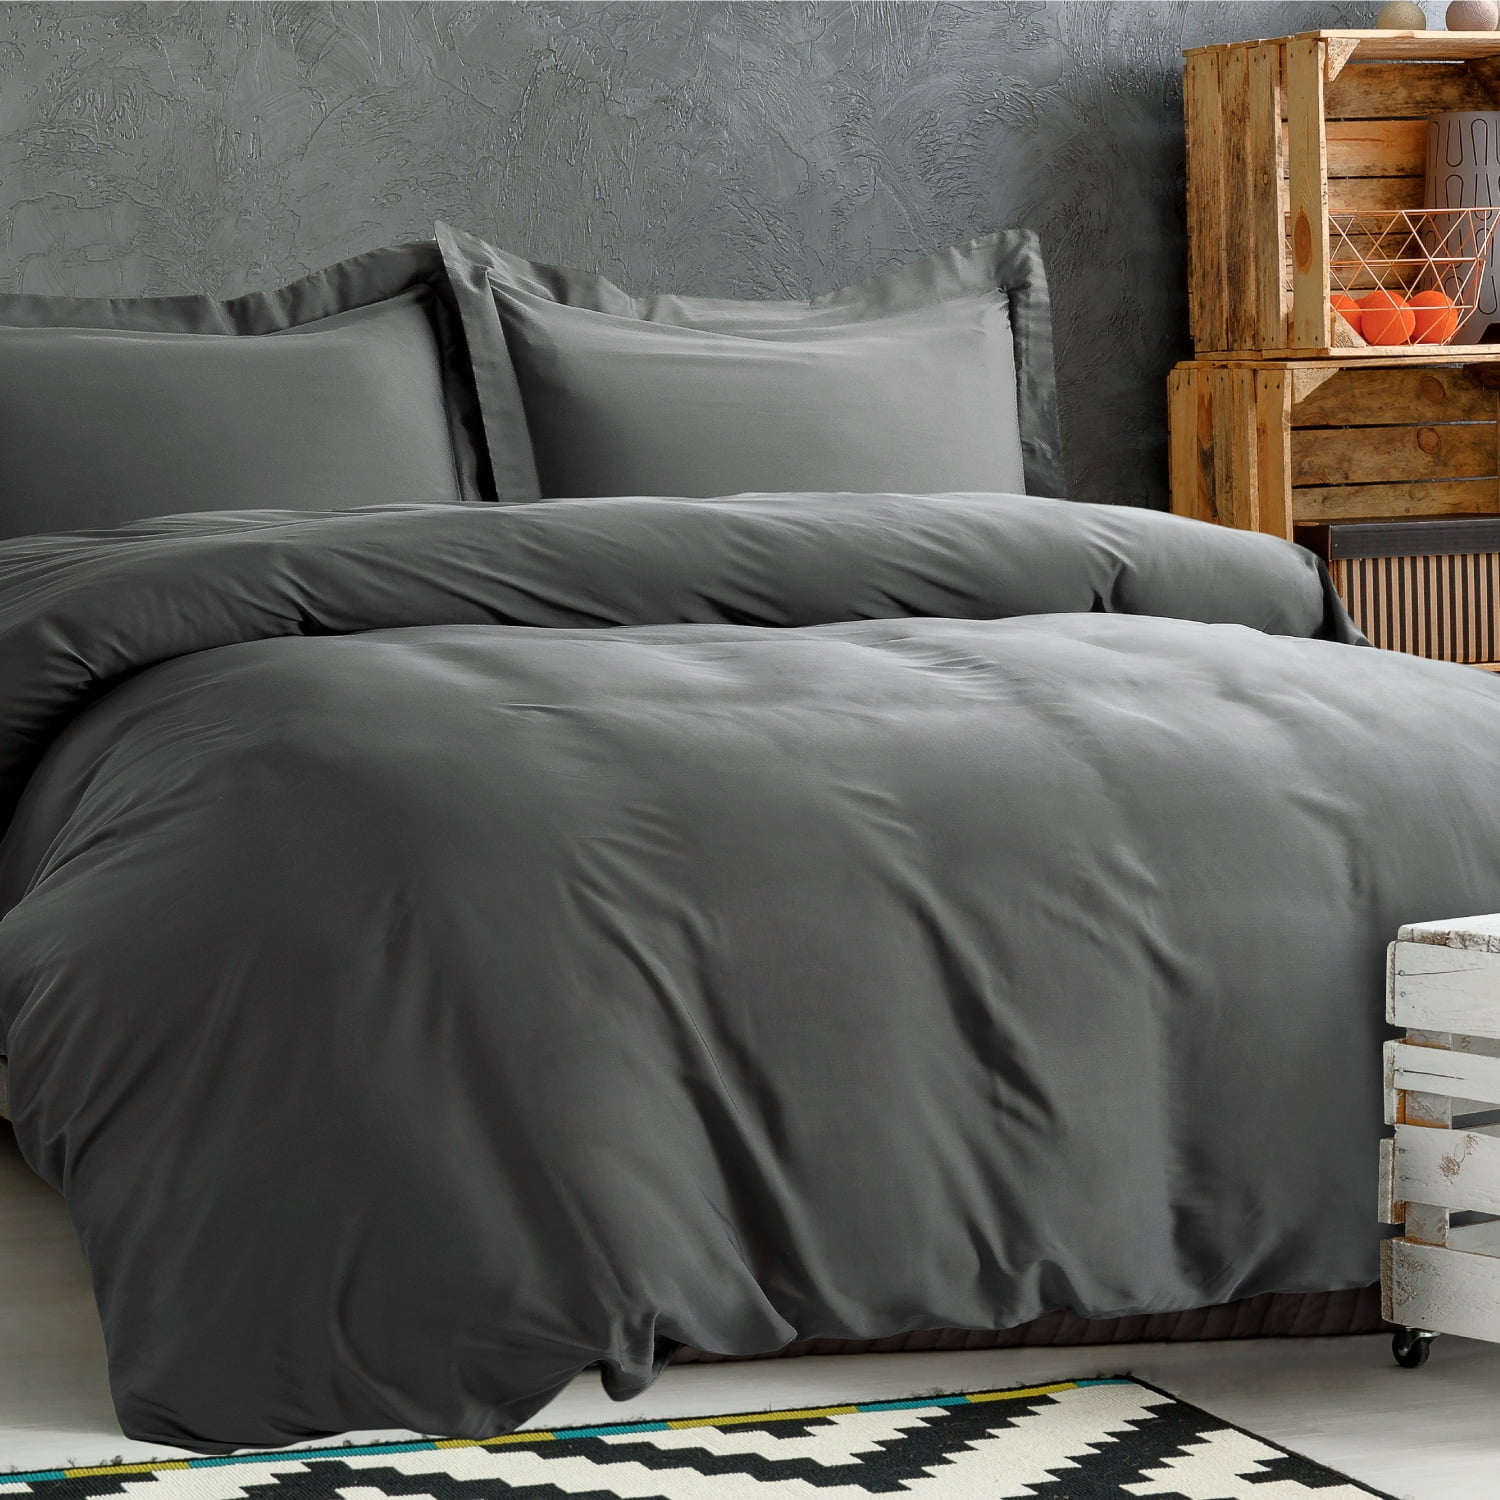 100 Viscose From Bamboo Duvet Cover King 3 Piece Gray Duvet Cover